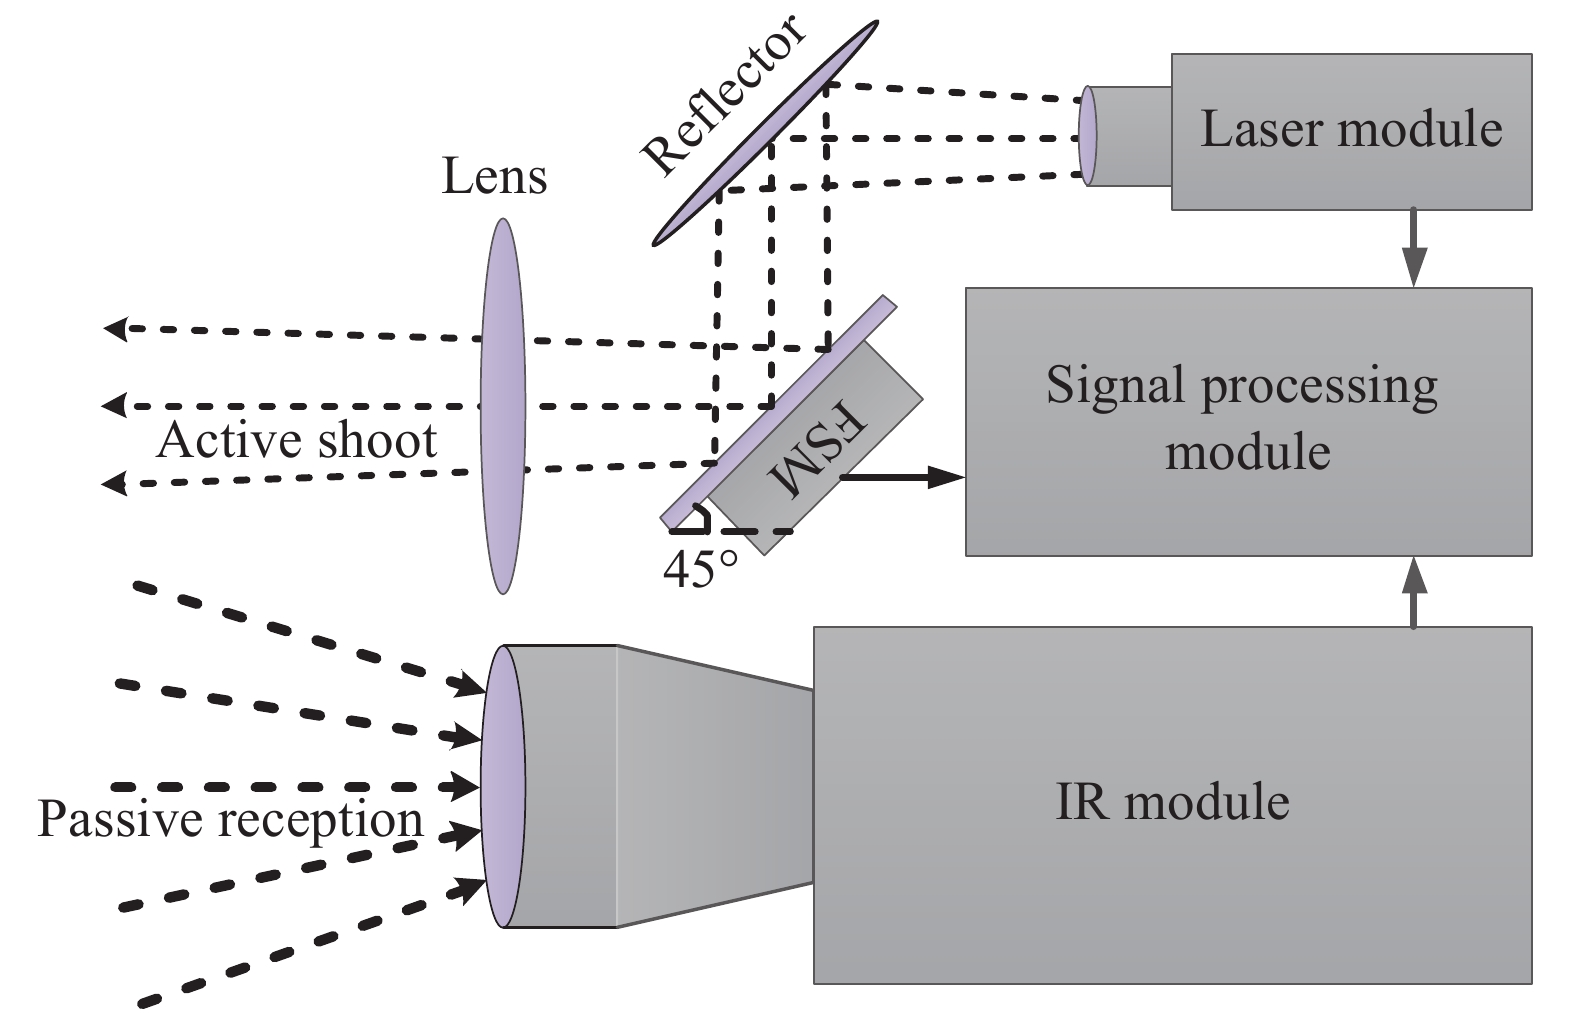 Schematic of the active and passive dual-band (laser/IR) composite system